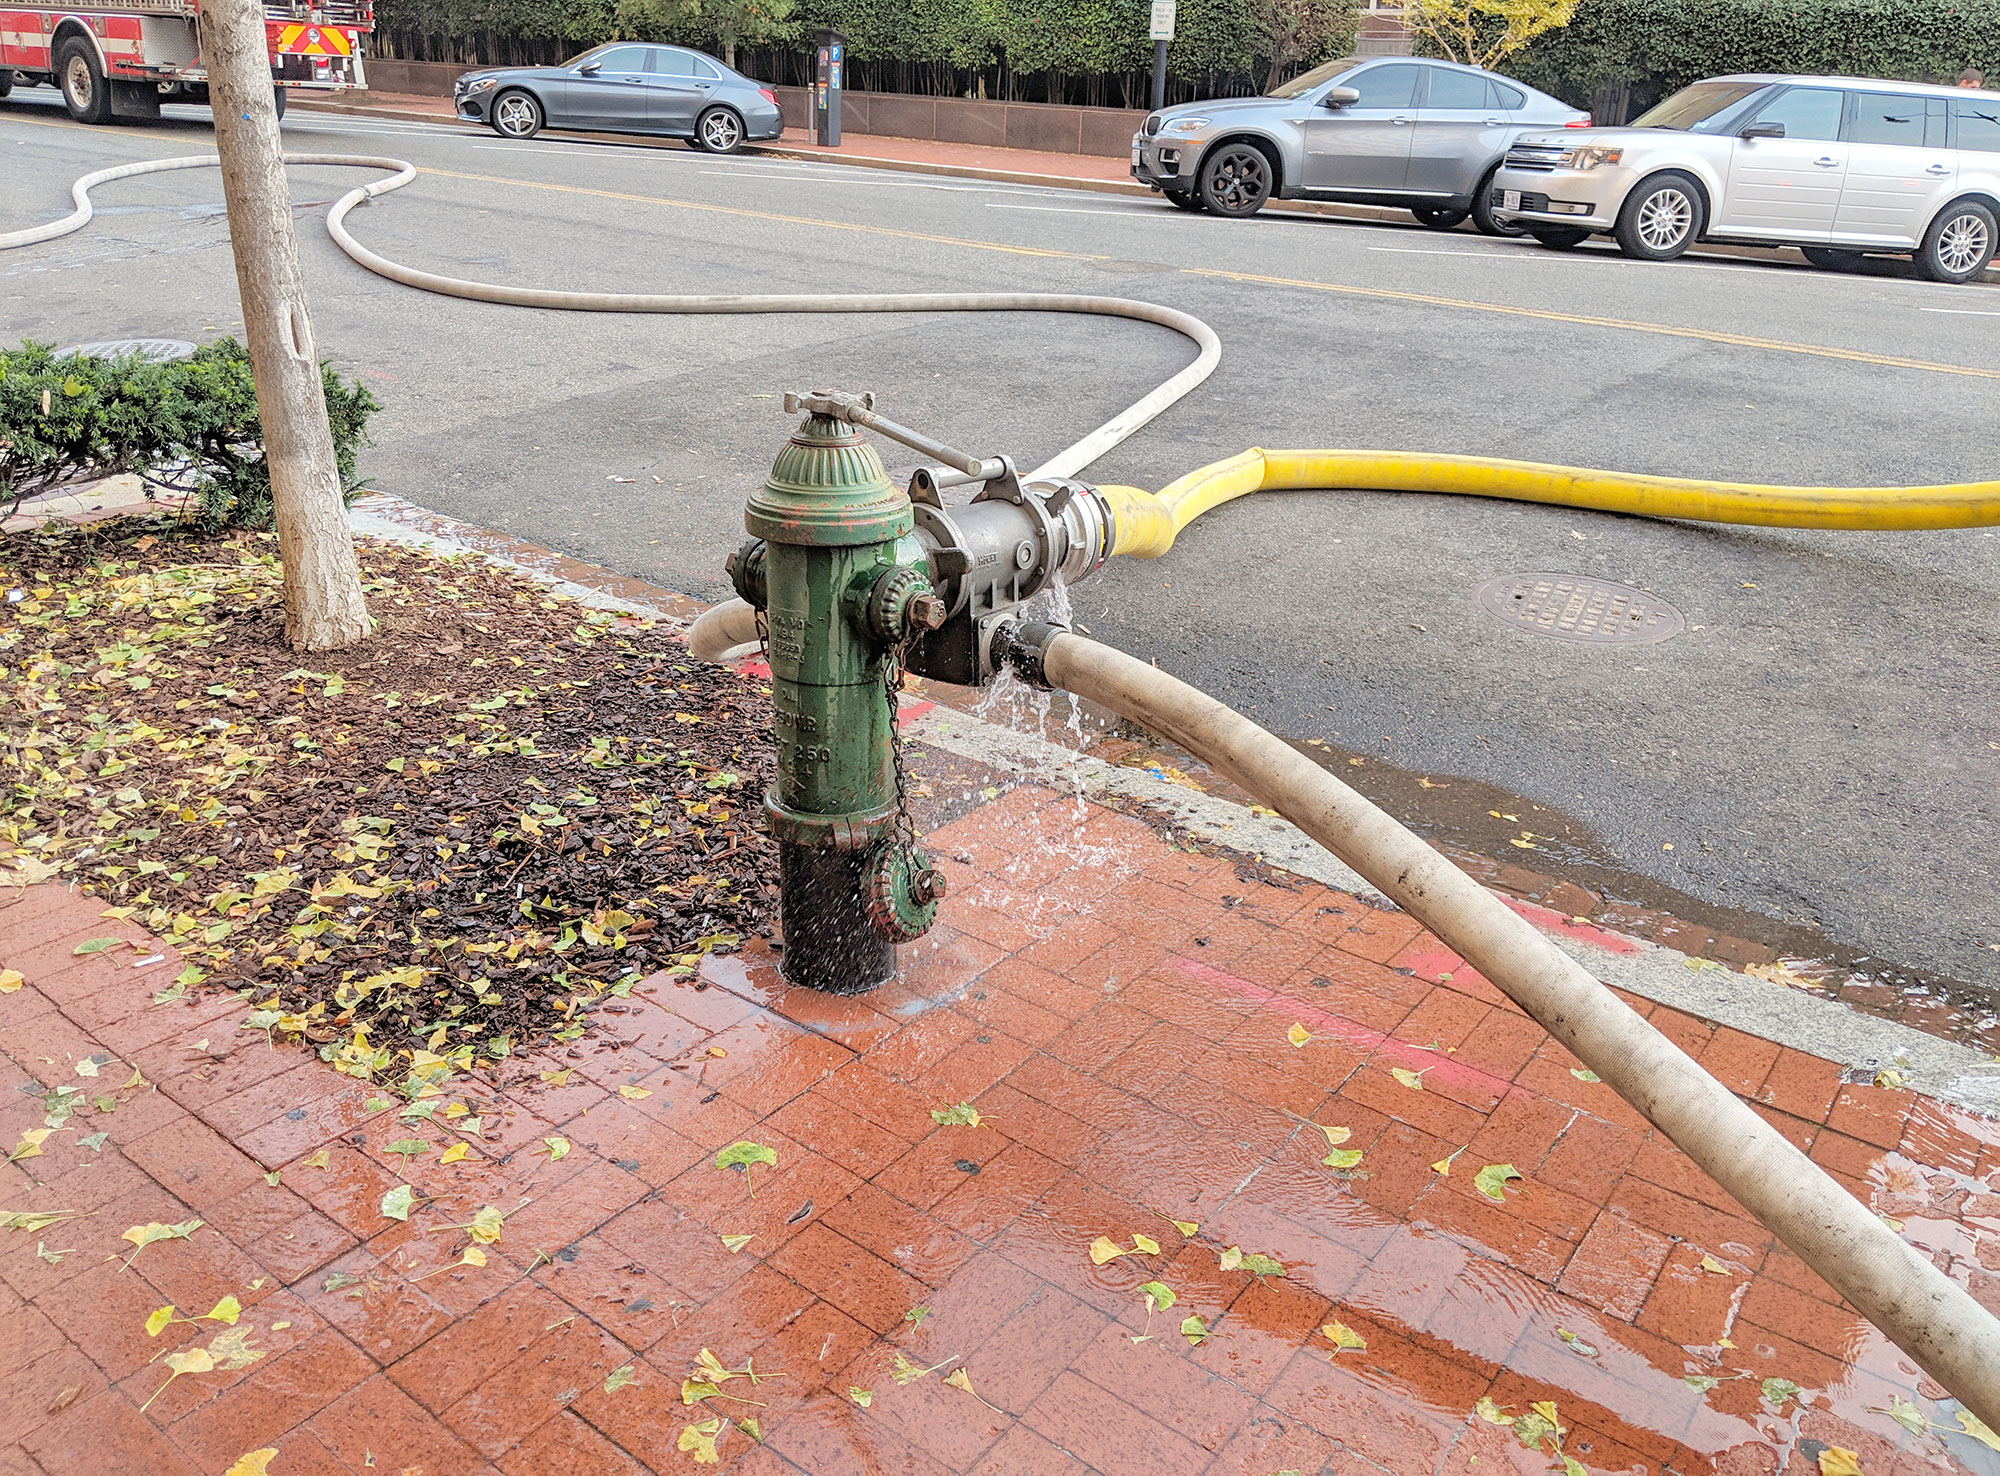 A fire hydrant being used in Chinatown, Washington, DC